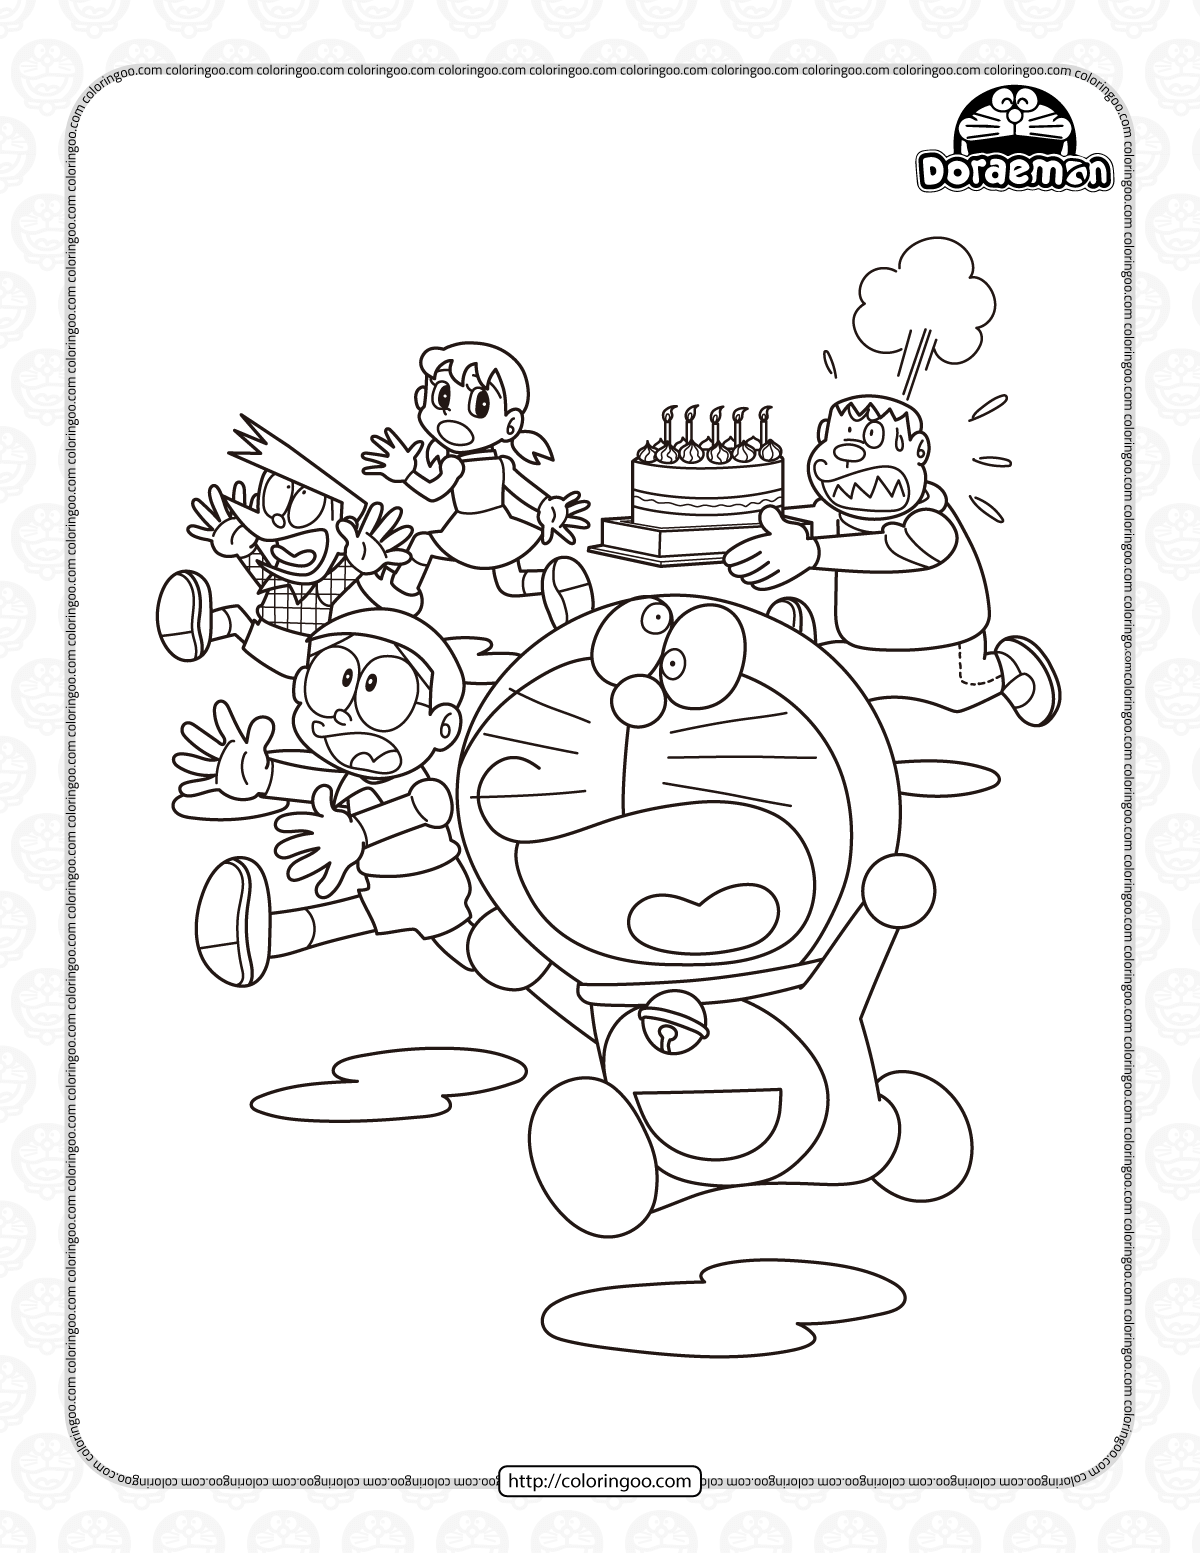 Angry Takeshi and Friends Coloring Page